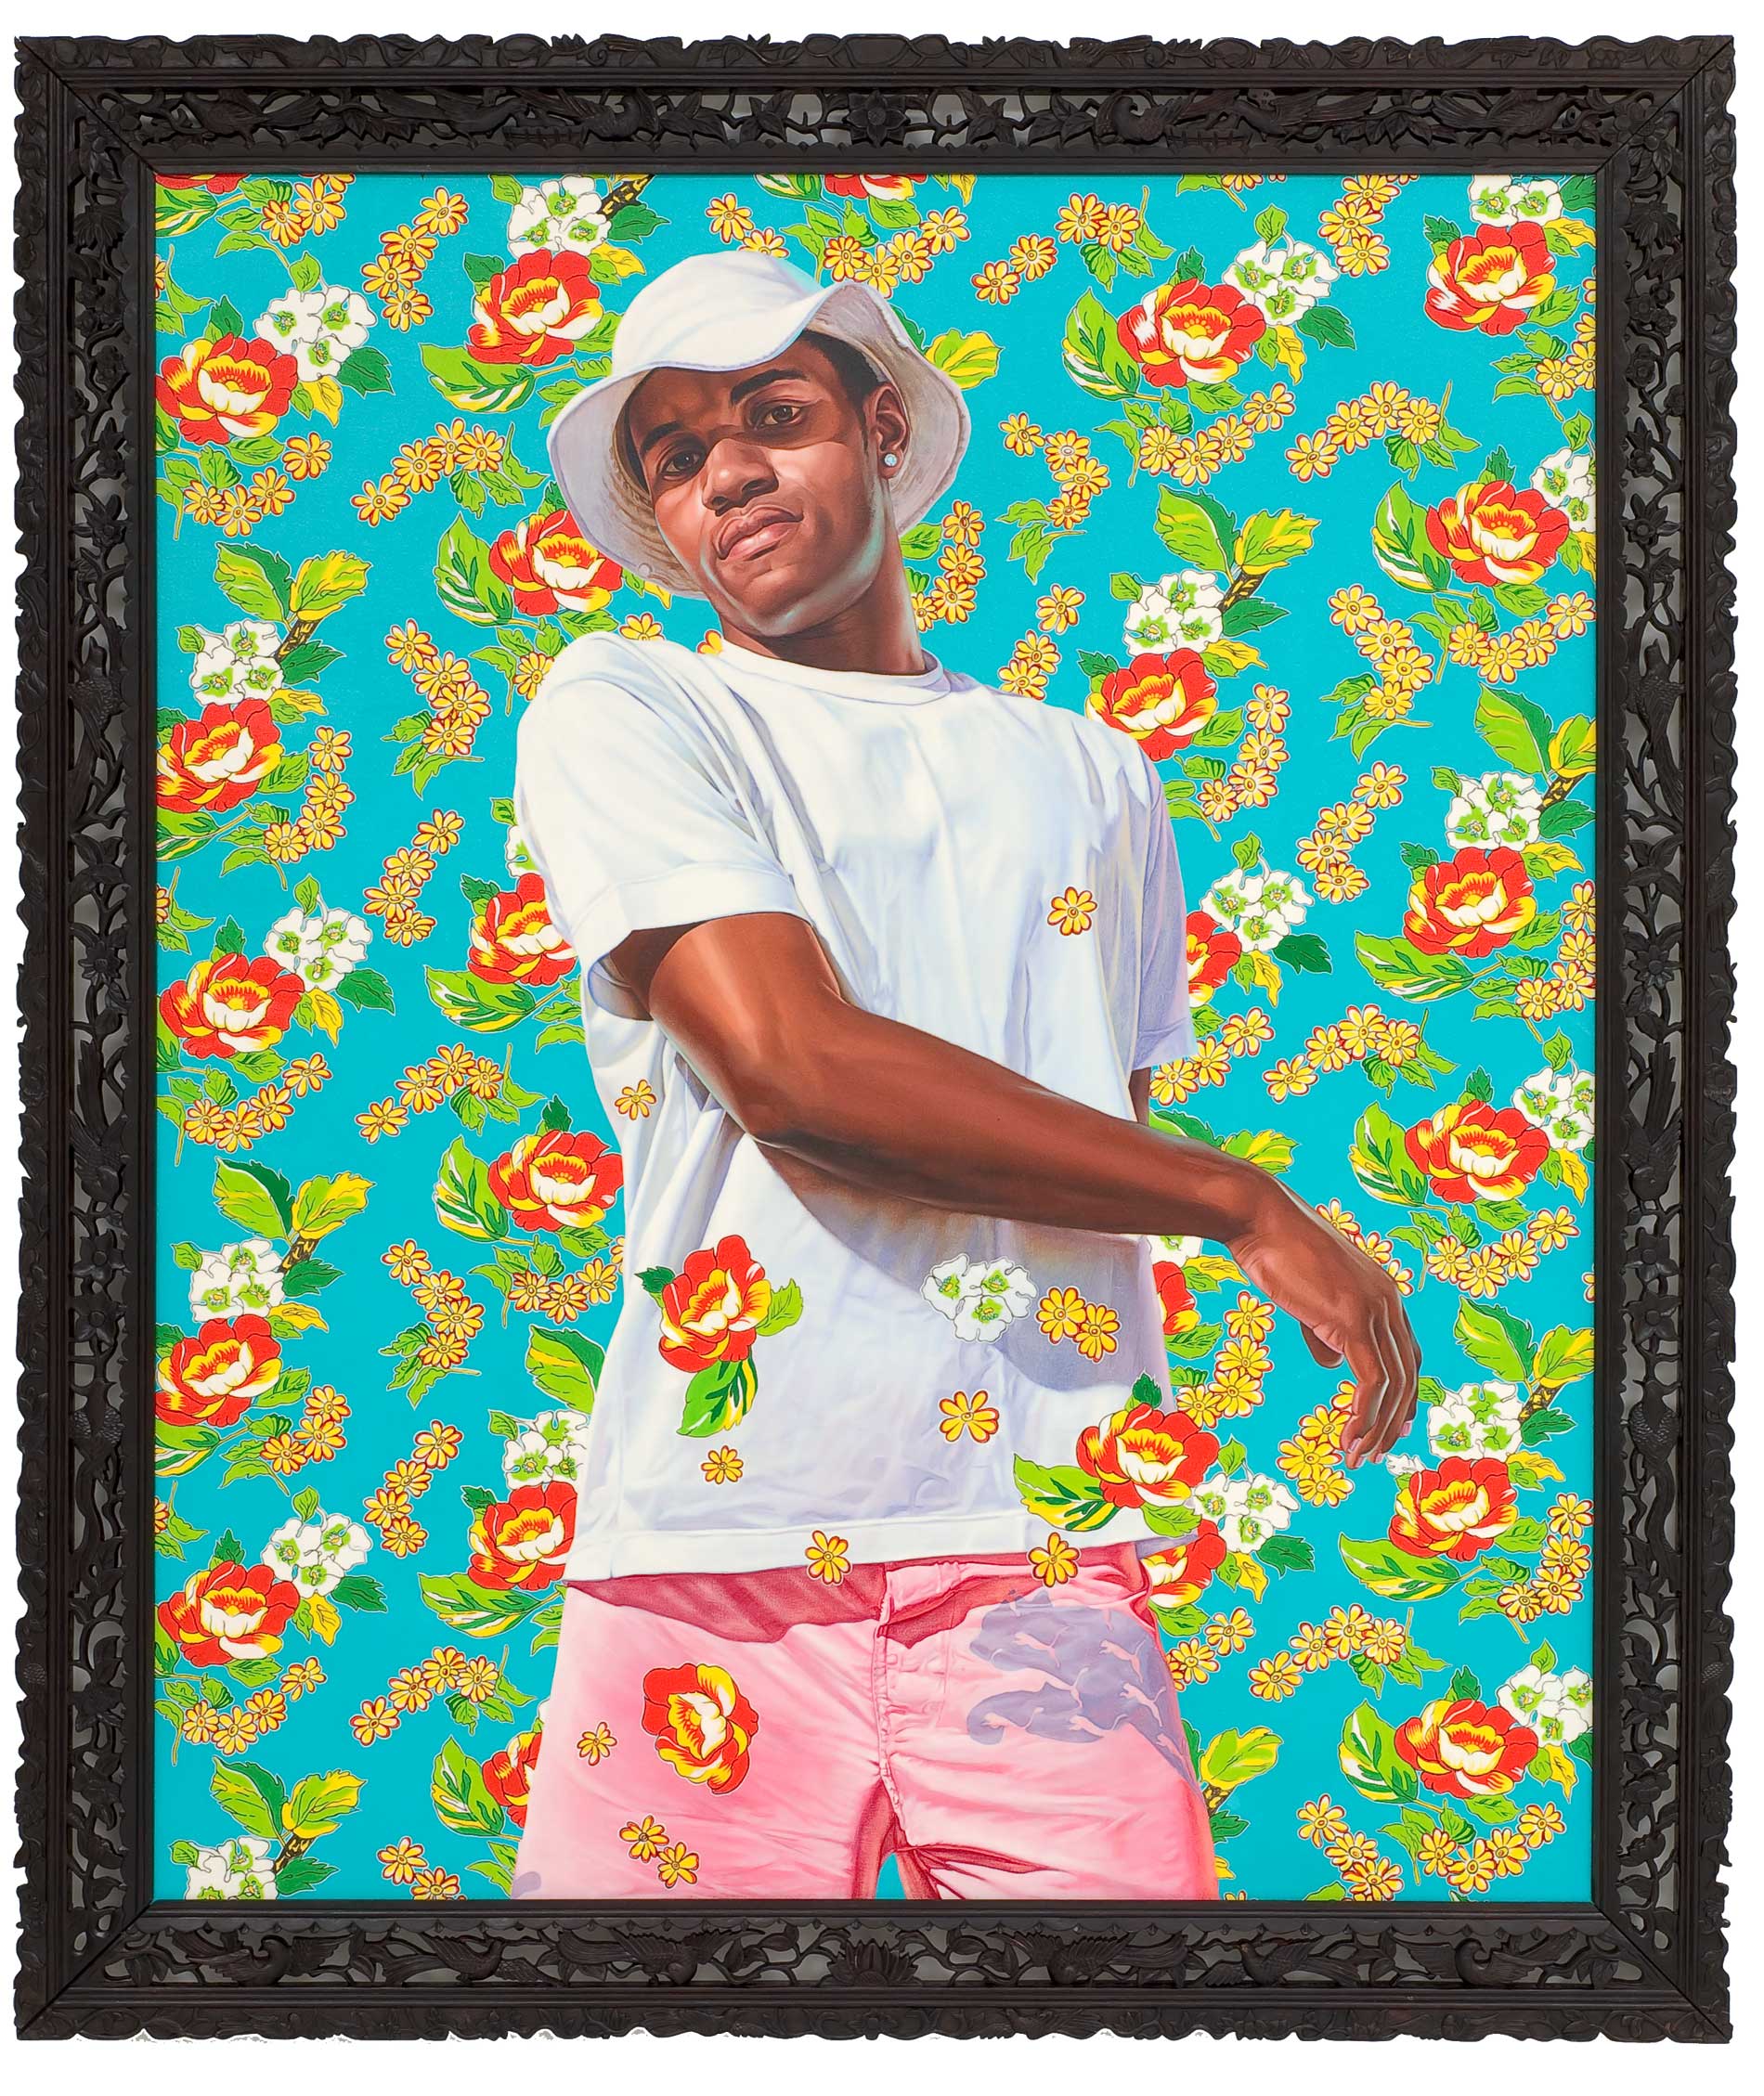 Kehinde Wiley | The World Stage: Brazil | Fall, 2009 Oil on Canvas. | 6